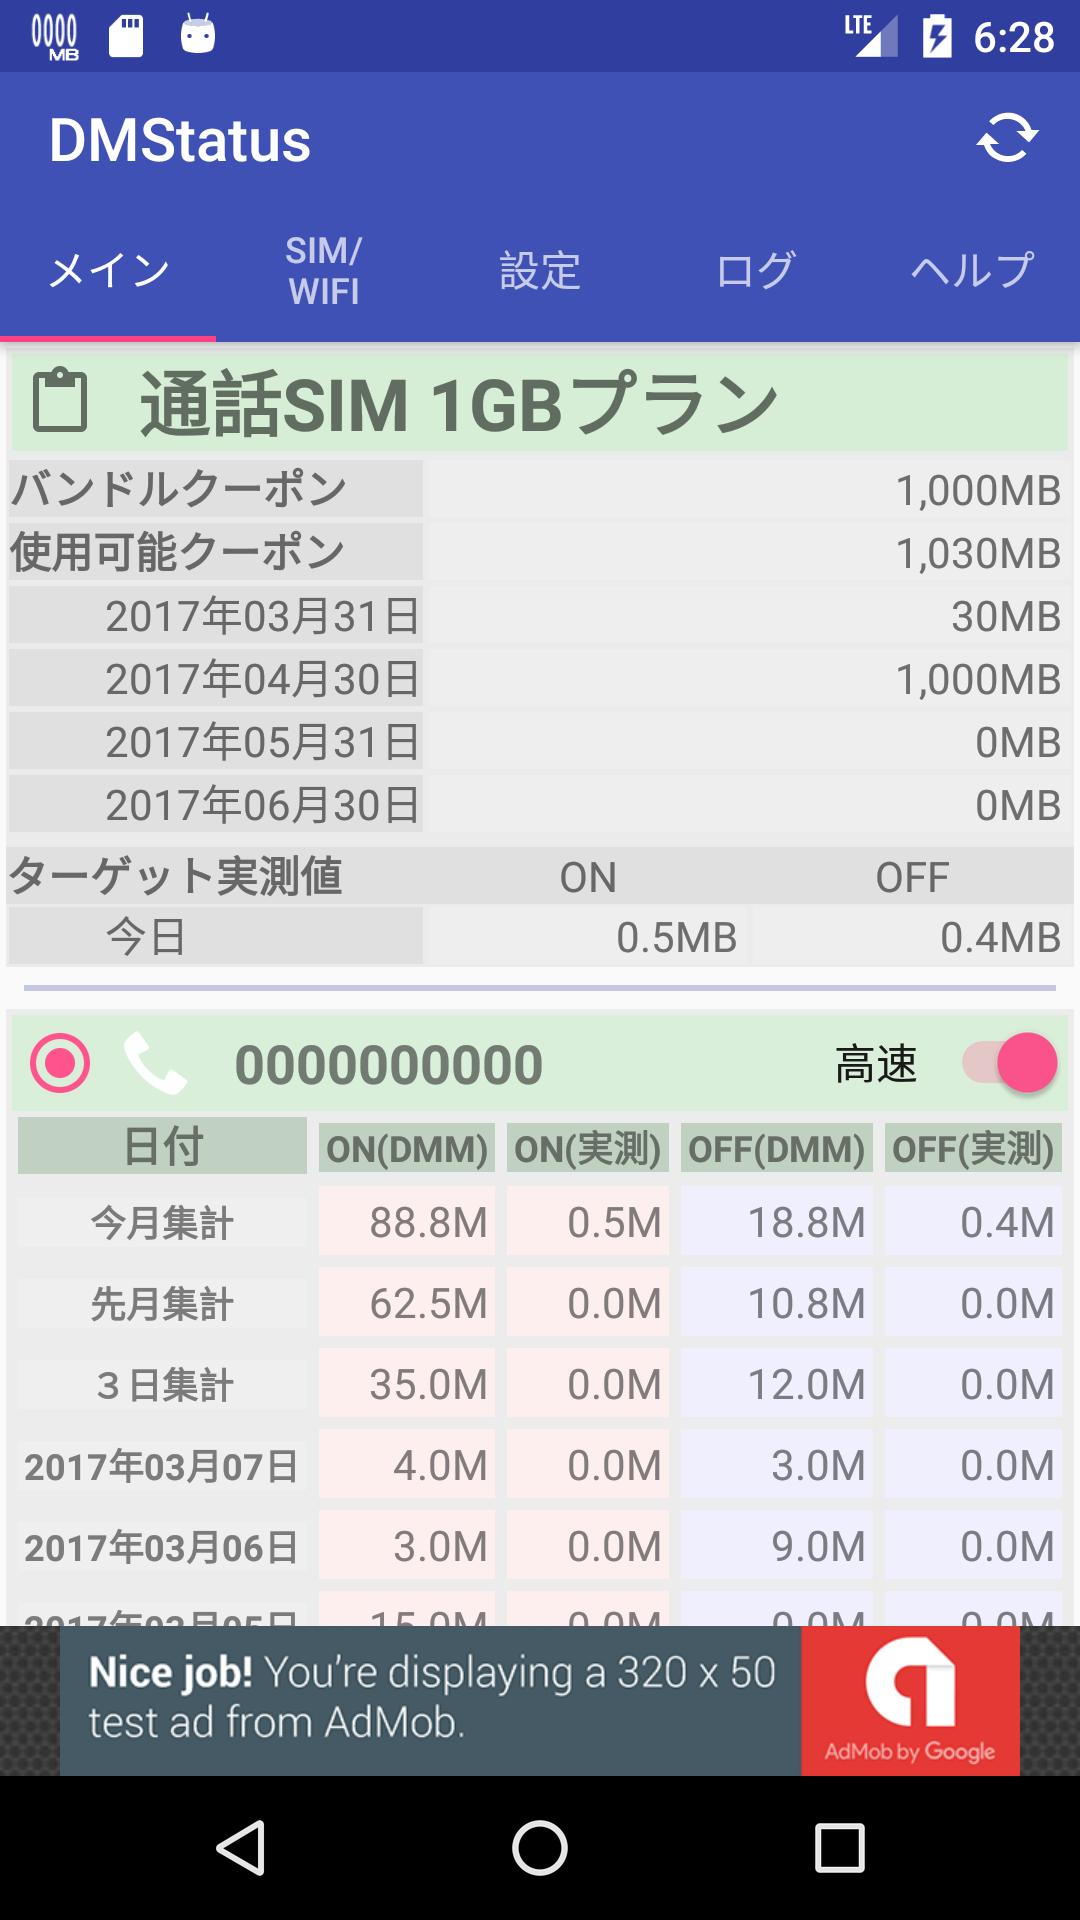 Dm Status Dmmモバイル通信量測定アプリ For Android Apk Download